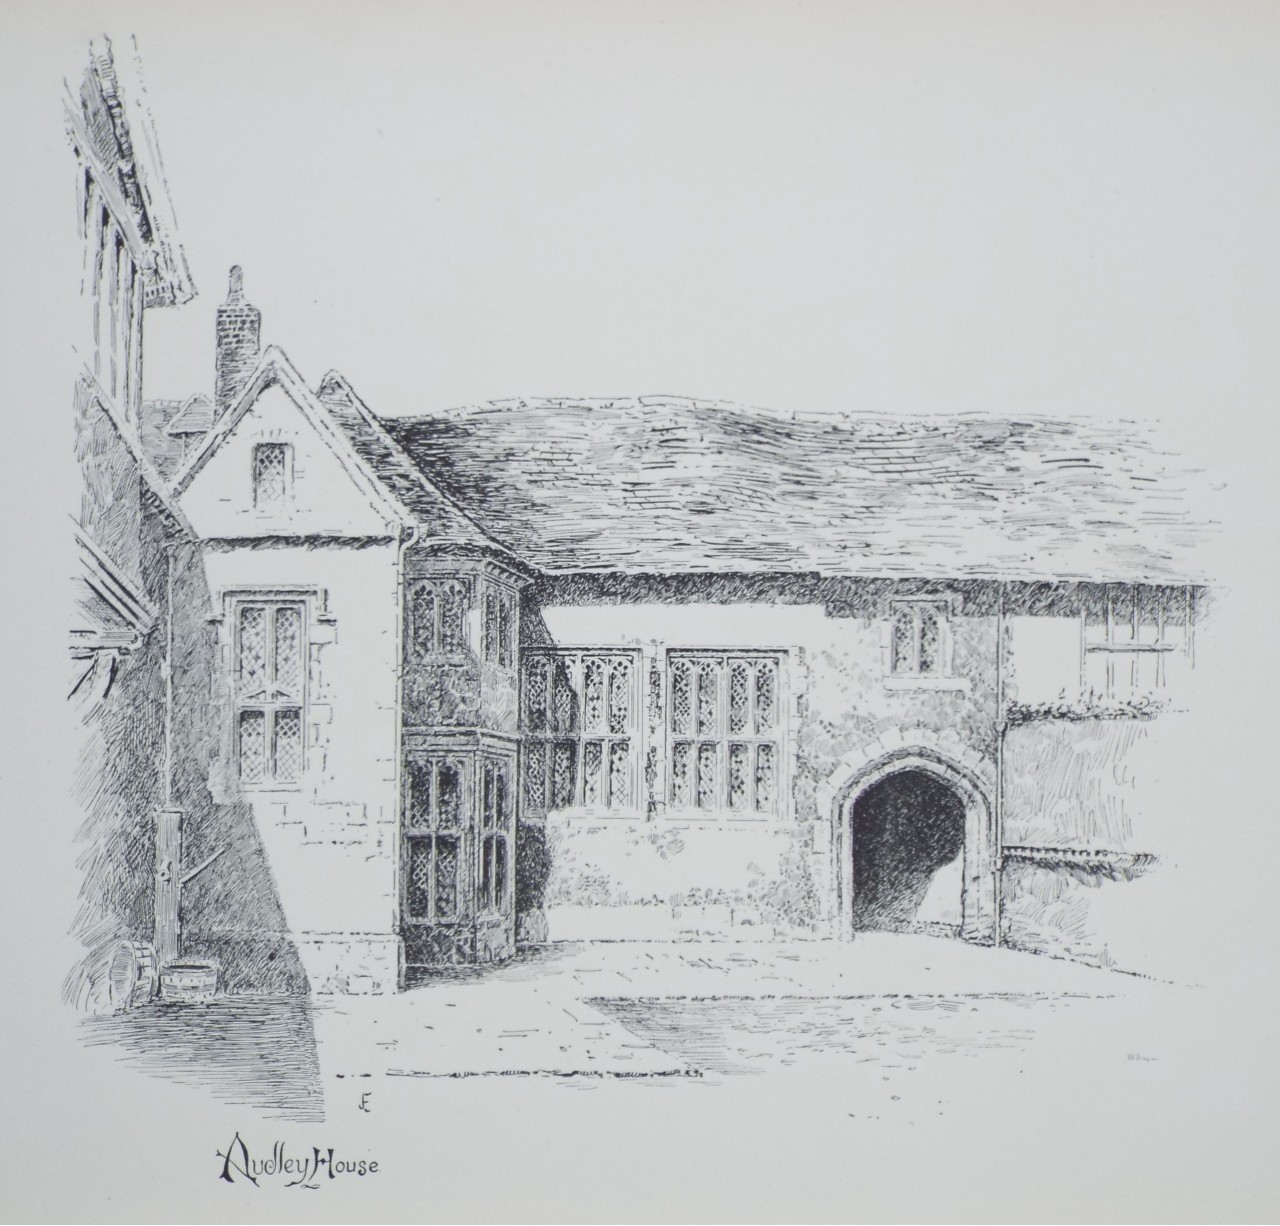 Lithograph - Audley House